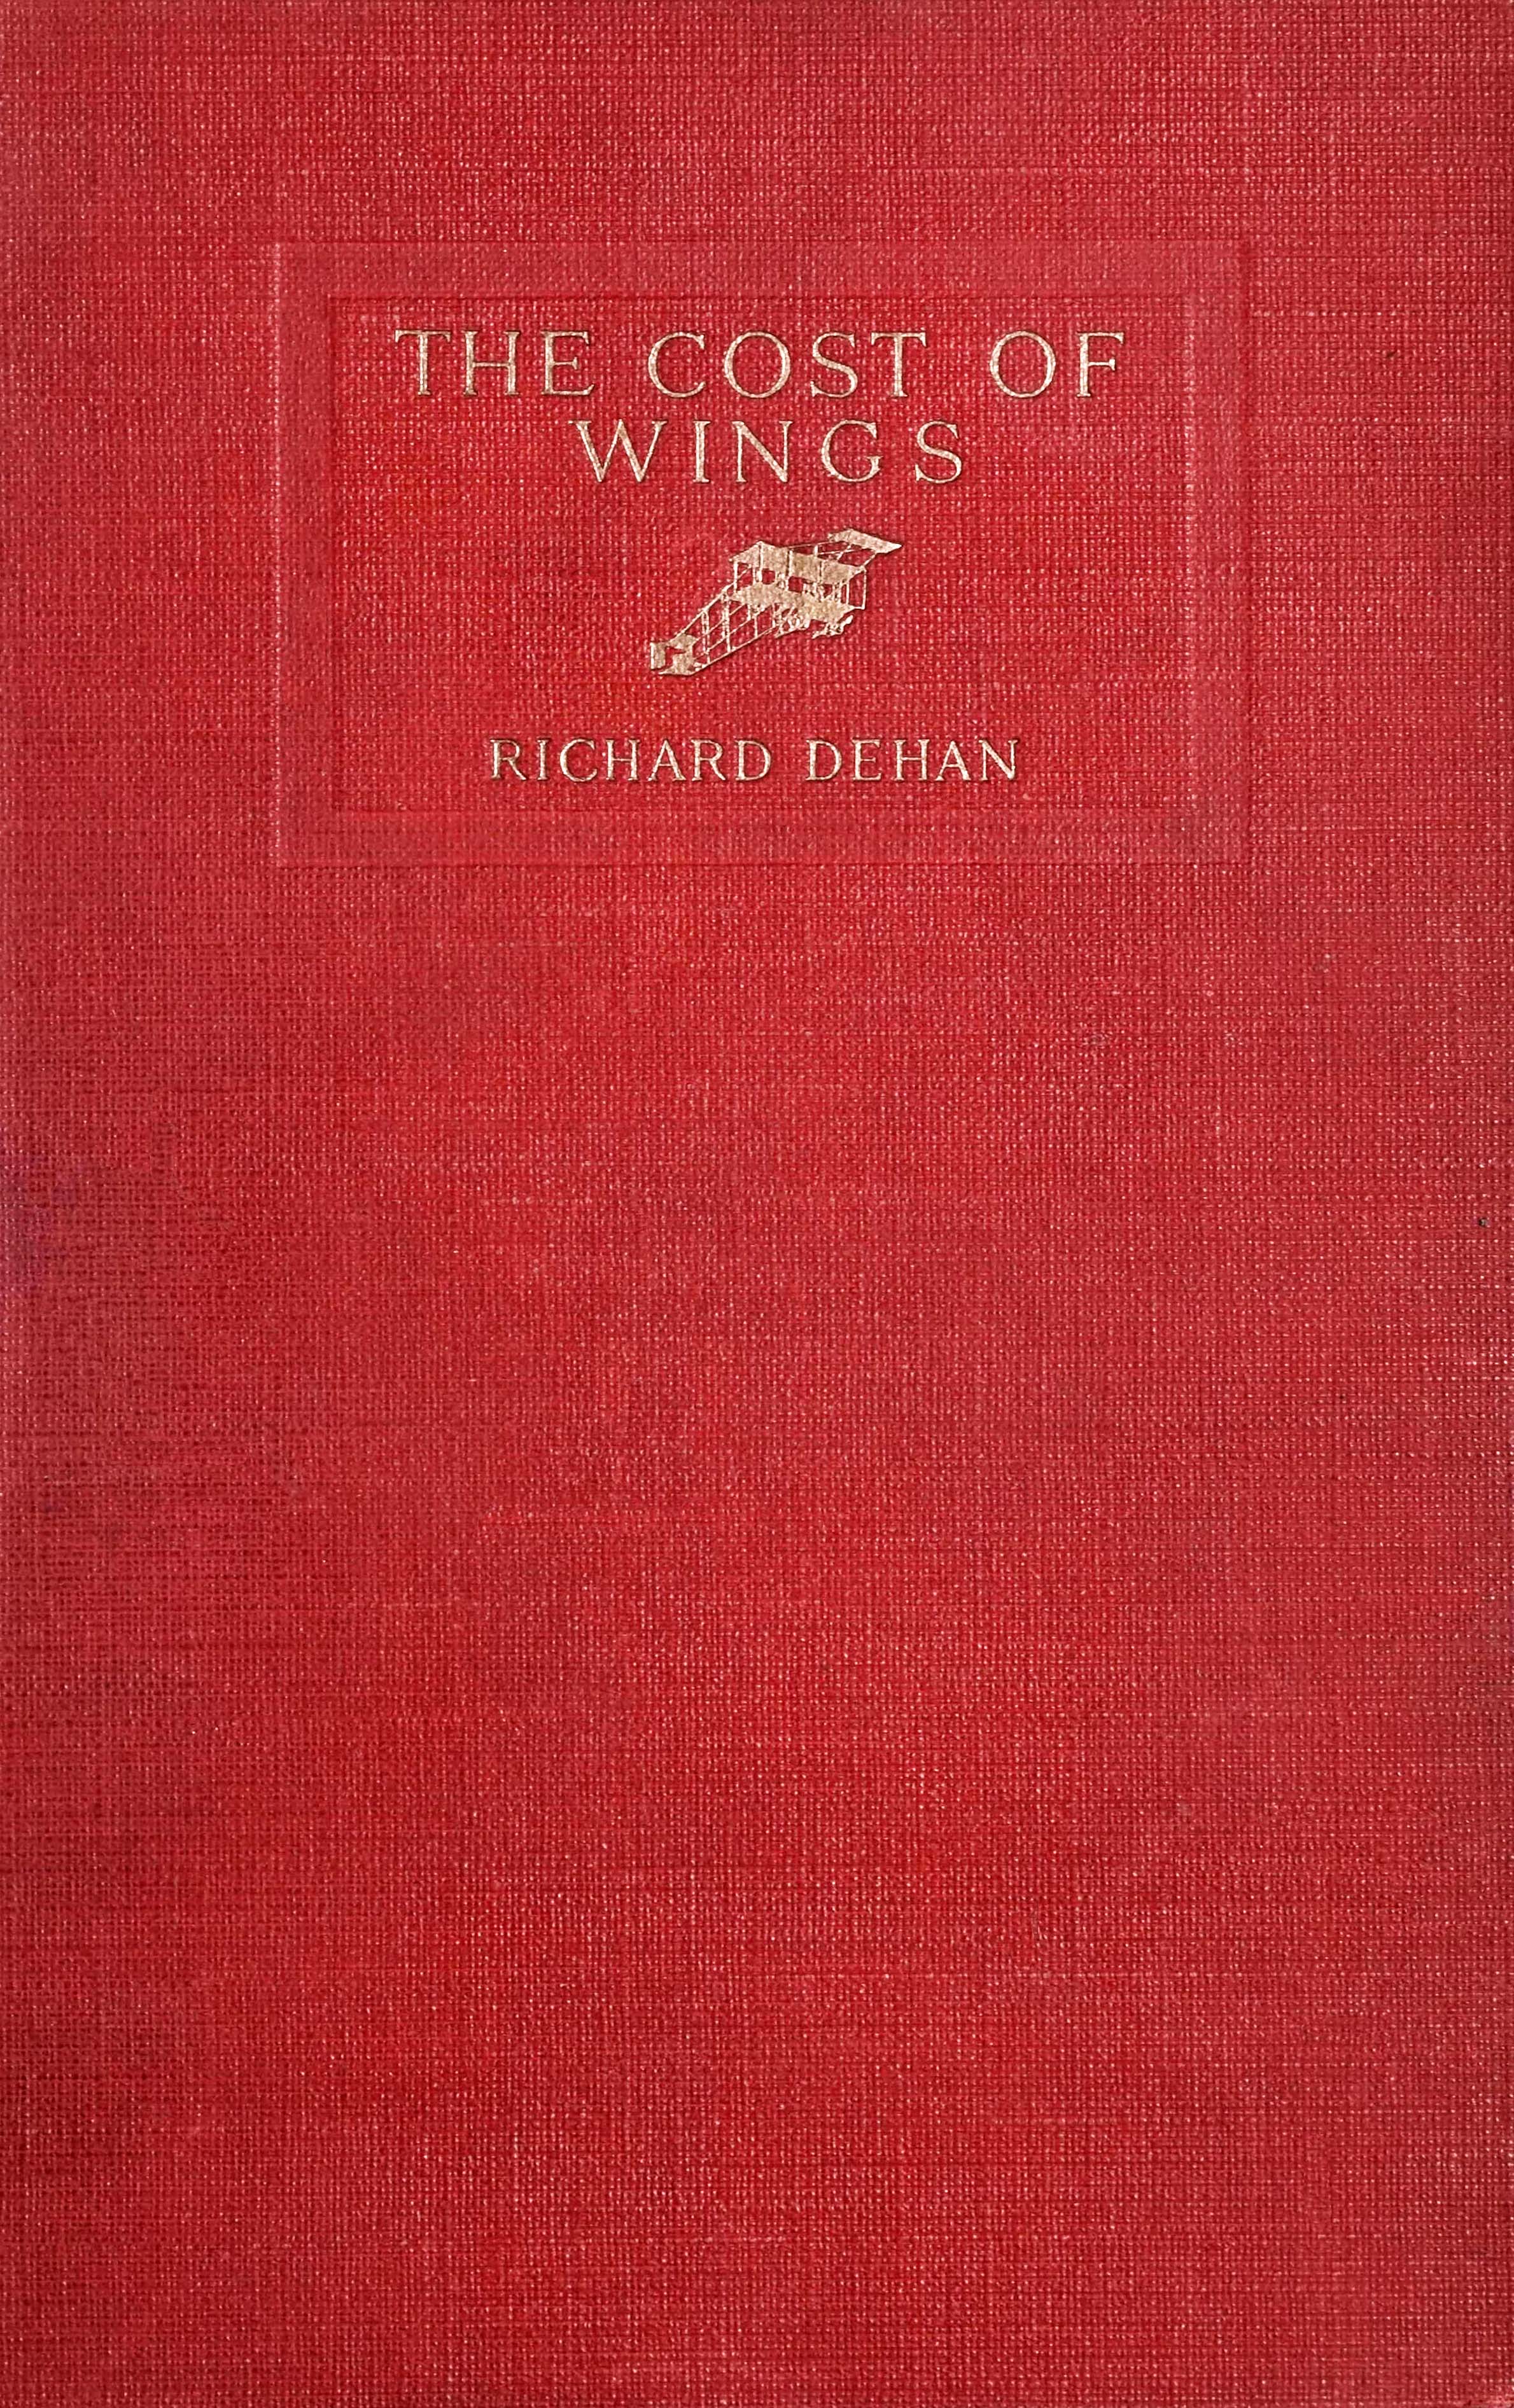 The cost of wings and other stories, by Richard Dehan—A Project Gutenberg eBook photo image